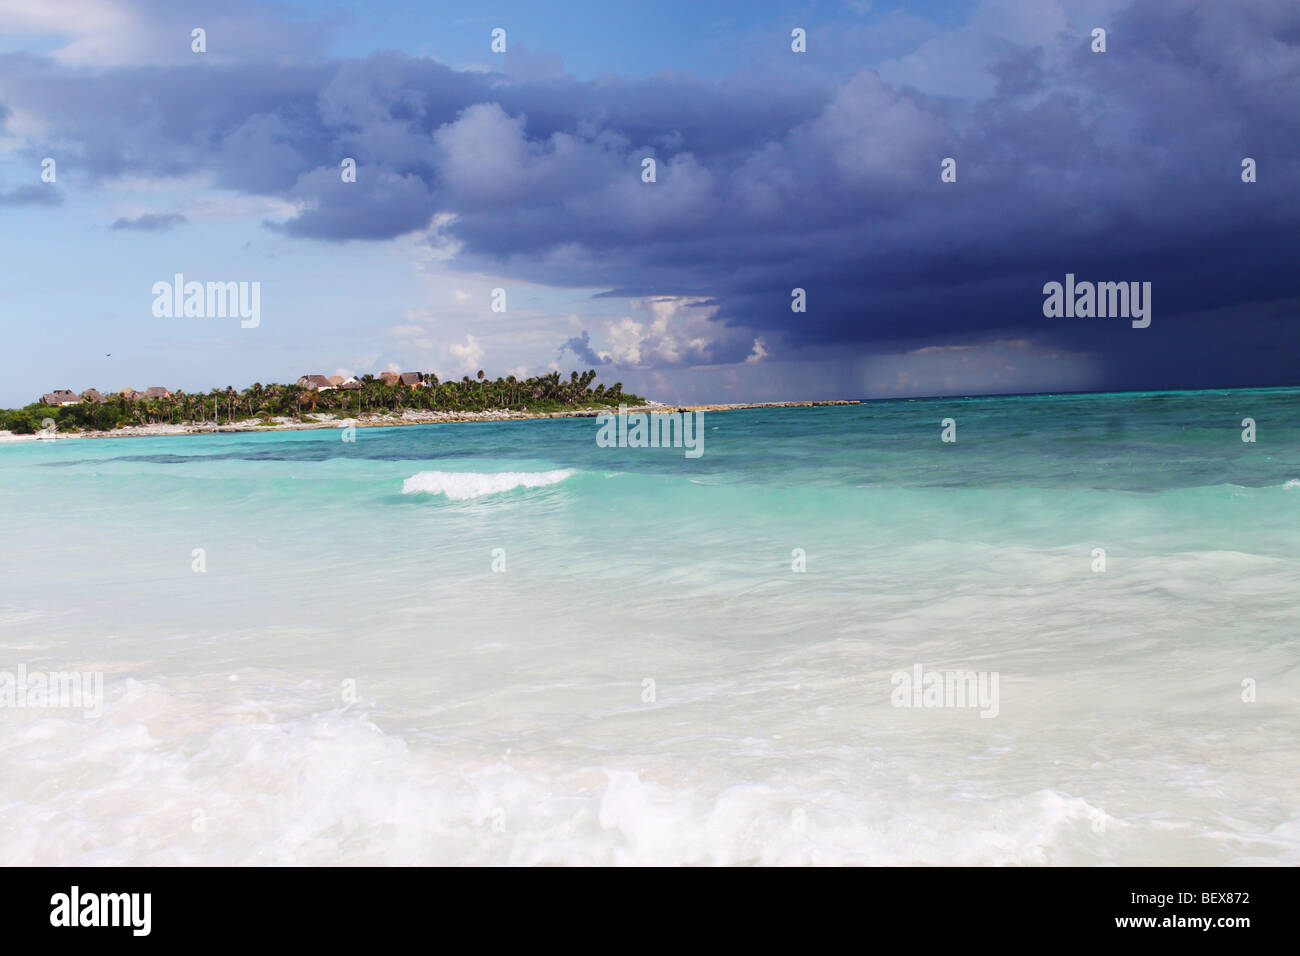 A storm approaching over a Mexican beach, Cancun's Riviera May Stock Photo